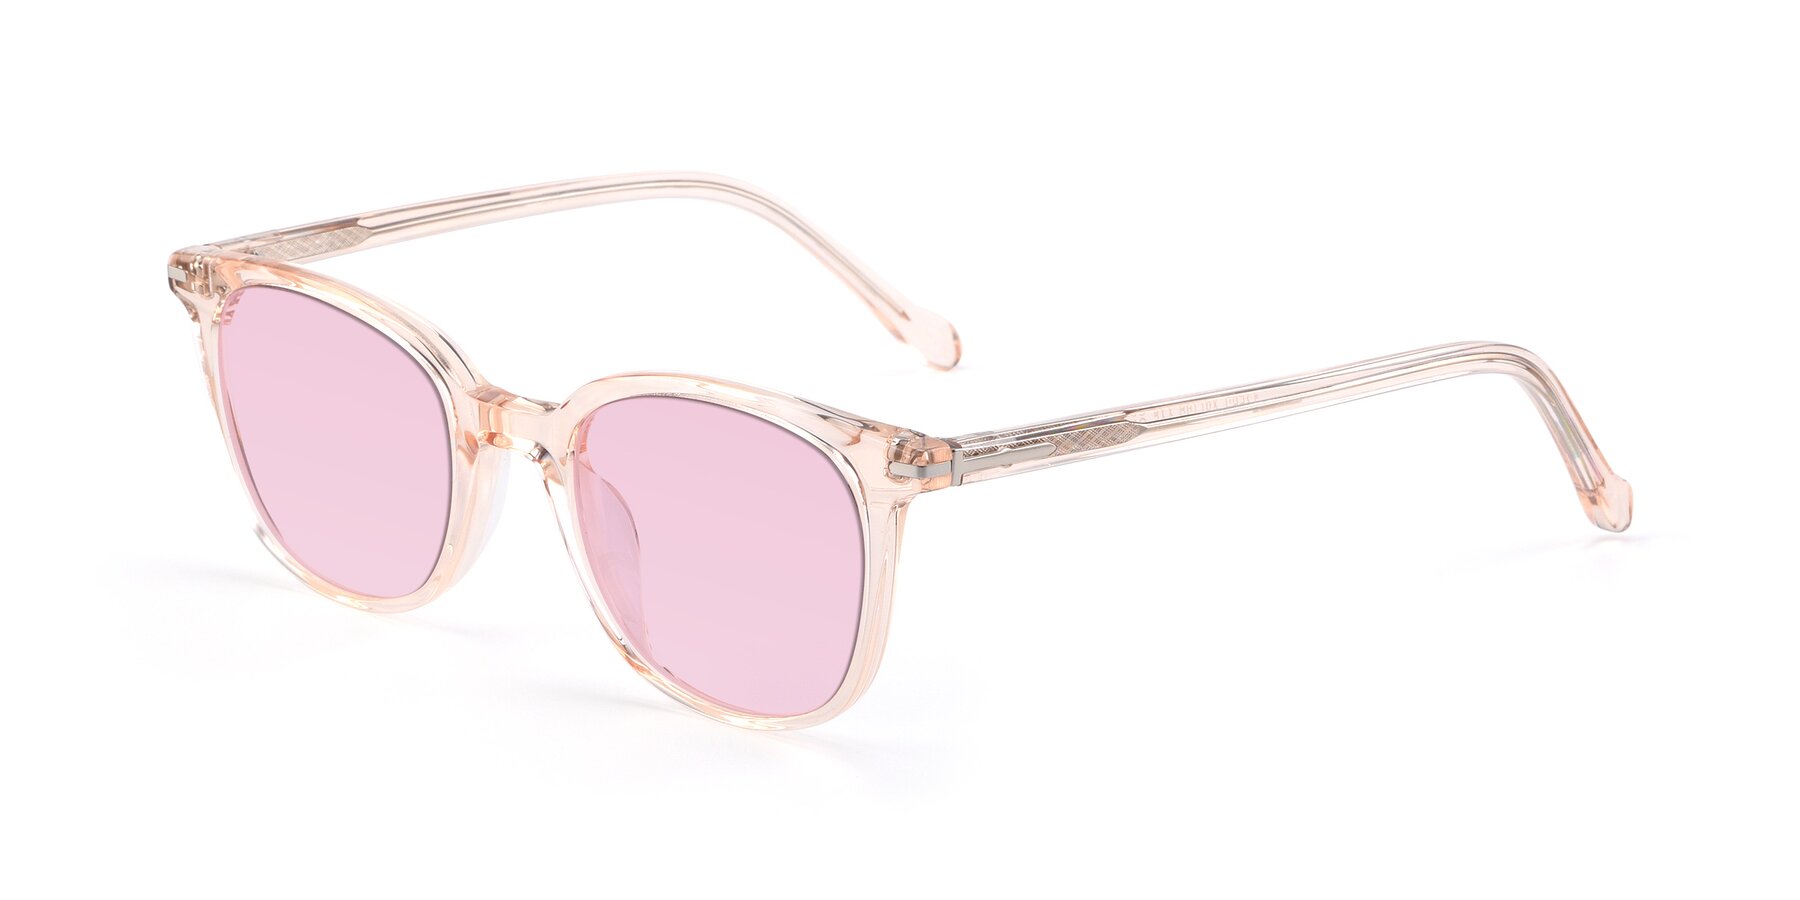 Angle of 17562 in Transparent Pink with Light Pink Tinted Lenses